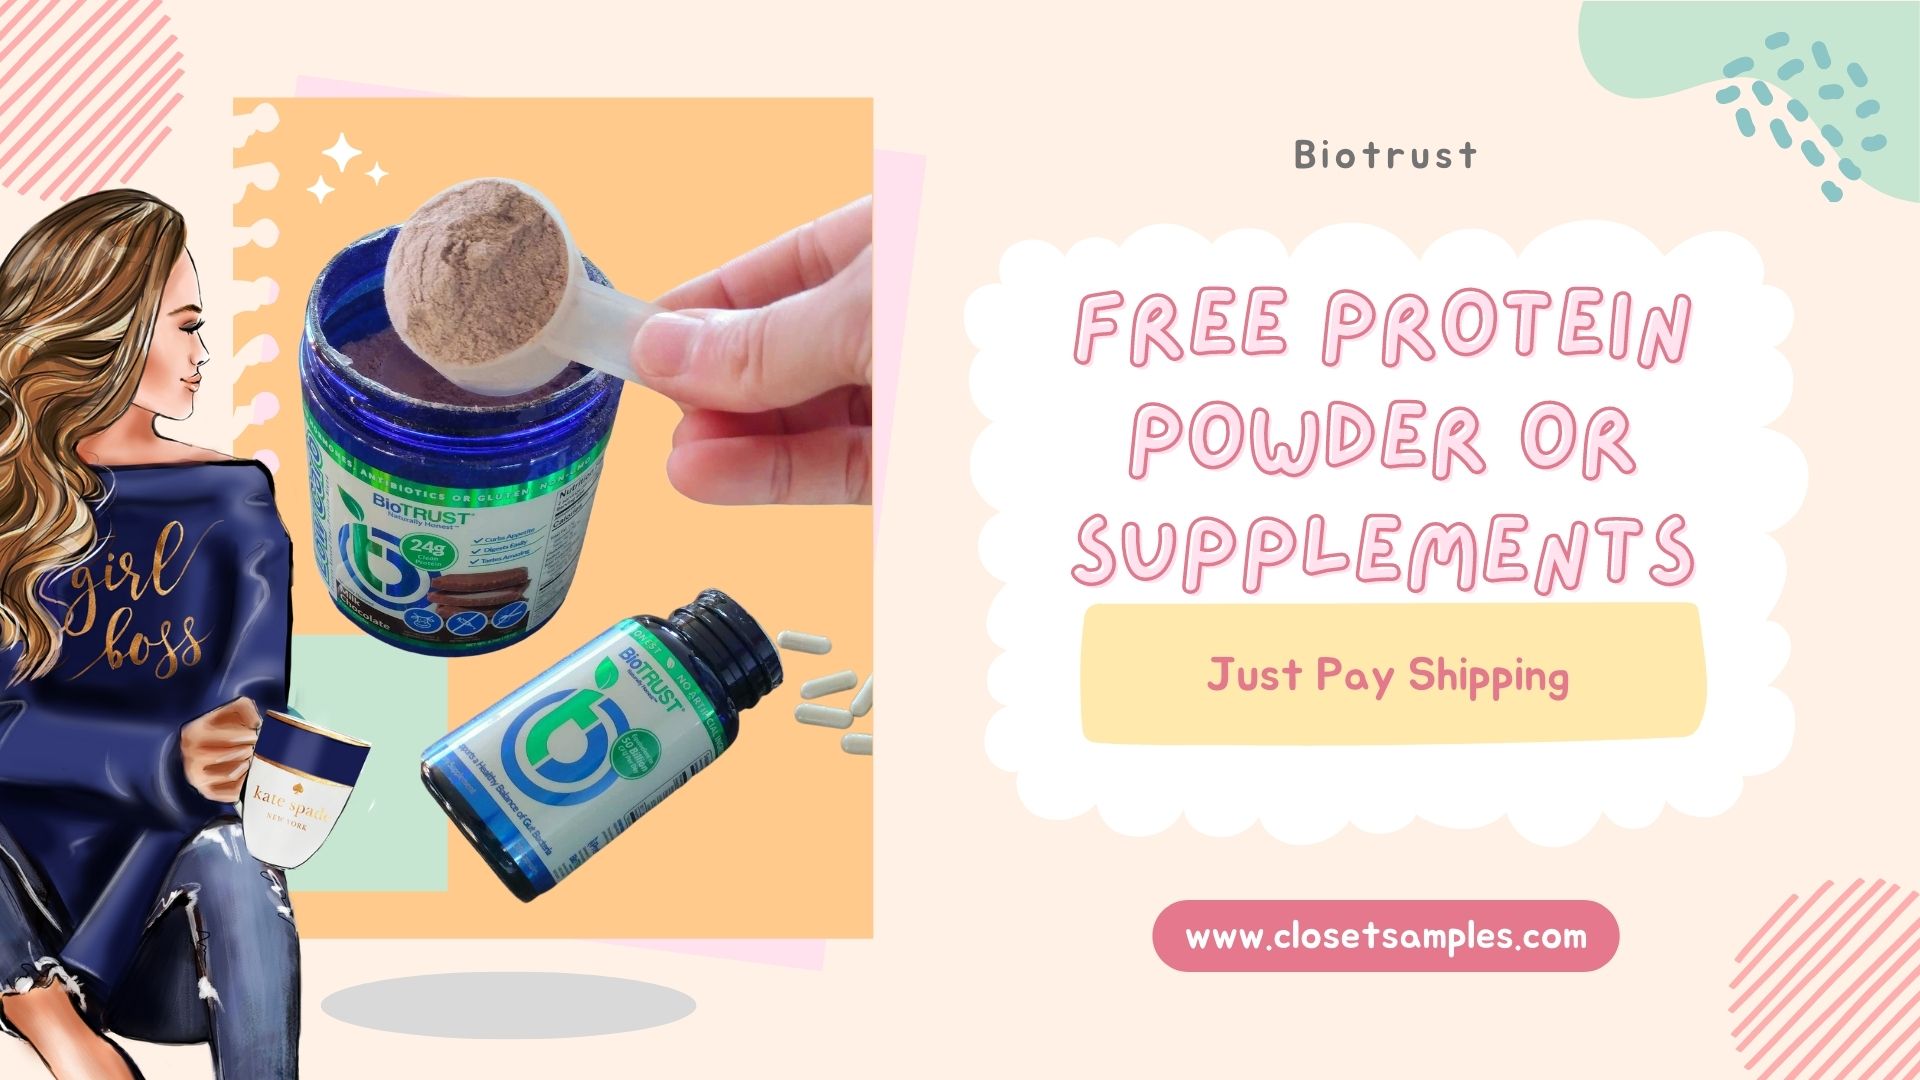 FREE Biotrust Protein Powder or Supplements Just Pay Shipping closetsamples